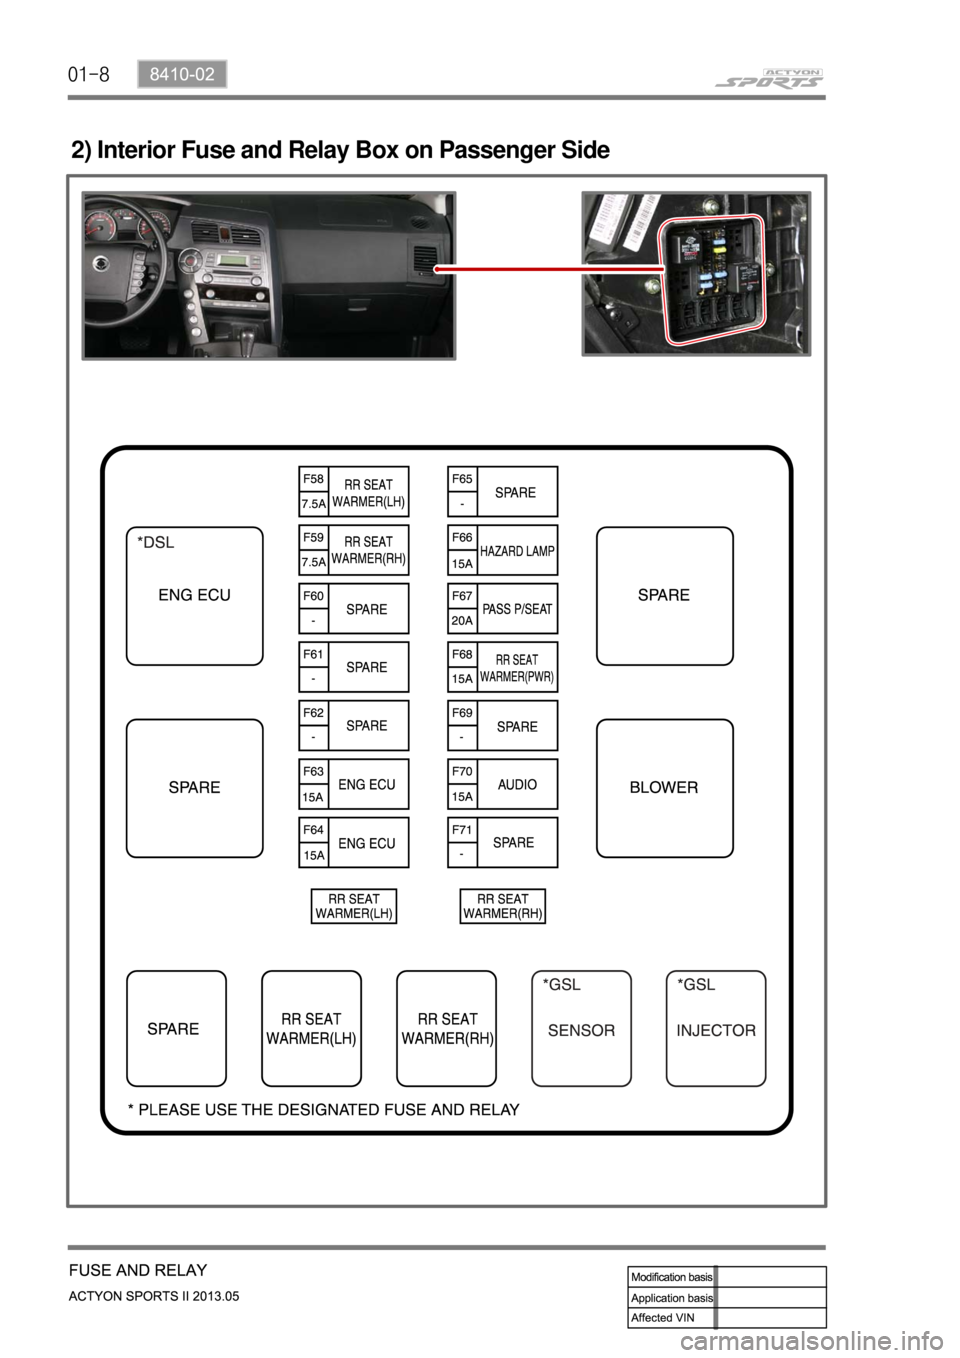 SSANGYONG NEW ACTYON SPORTS 2013  Service Manual 01-8
2) Interior Fuse and Relay Box on Passenger Side  